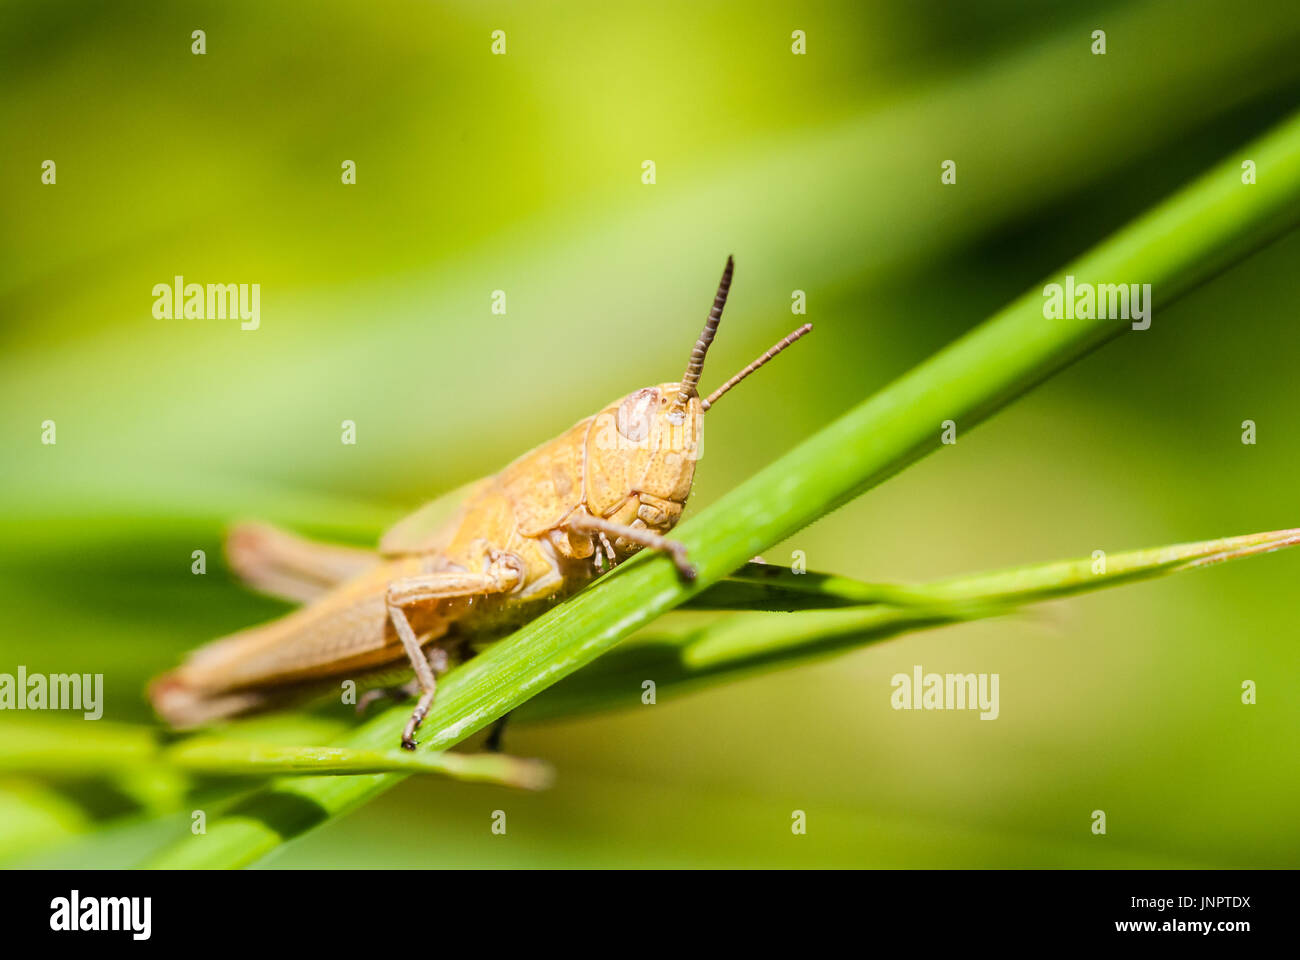 Macro of grasshopper sitting on grass and looking around. Smooth green background. Stock Photo